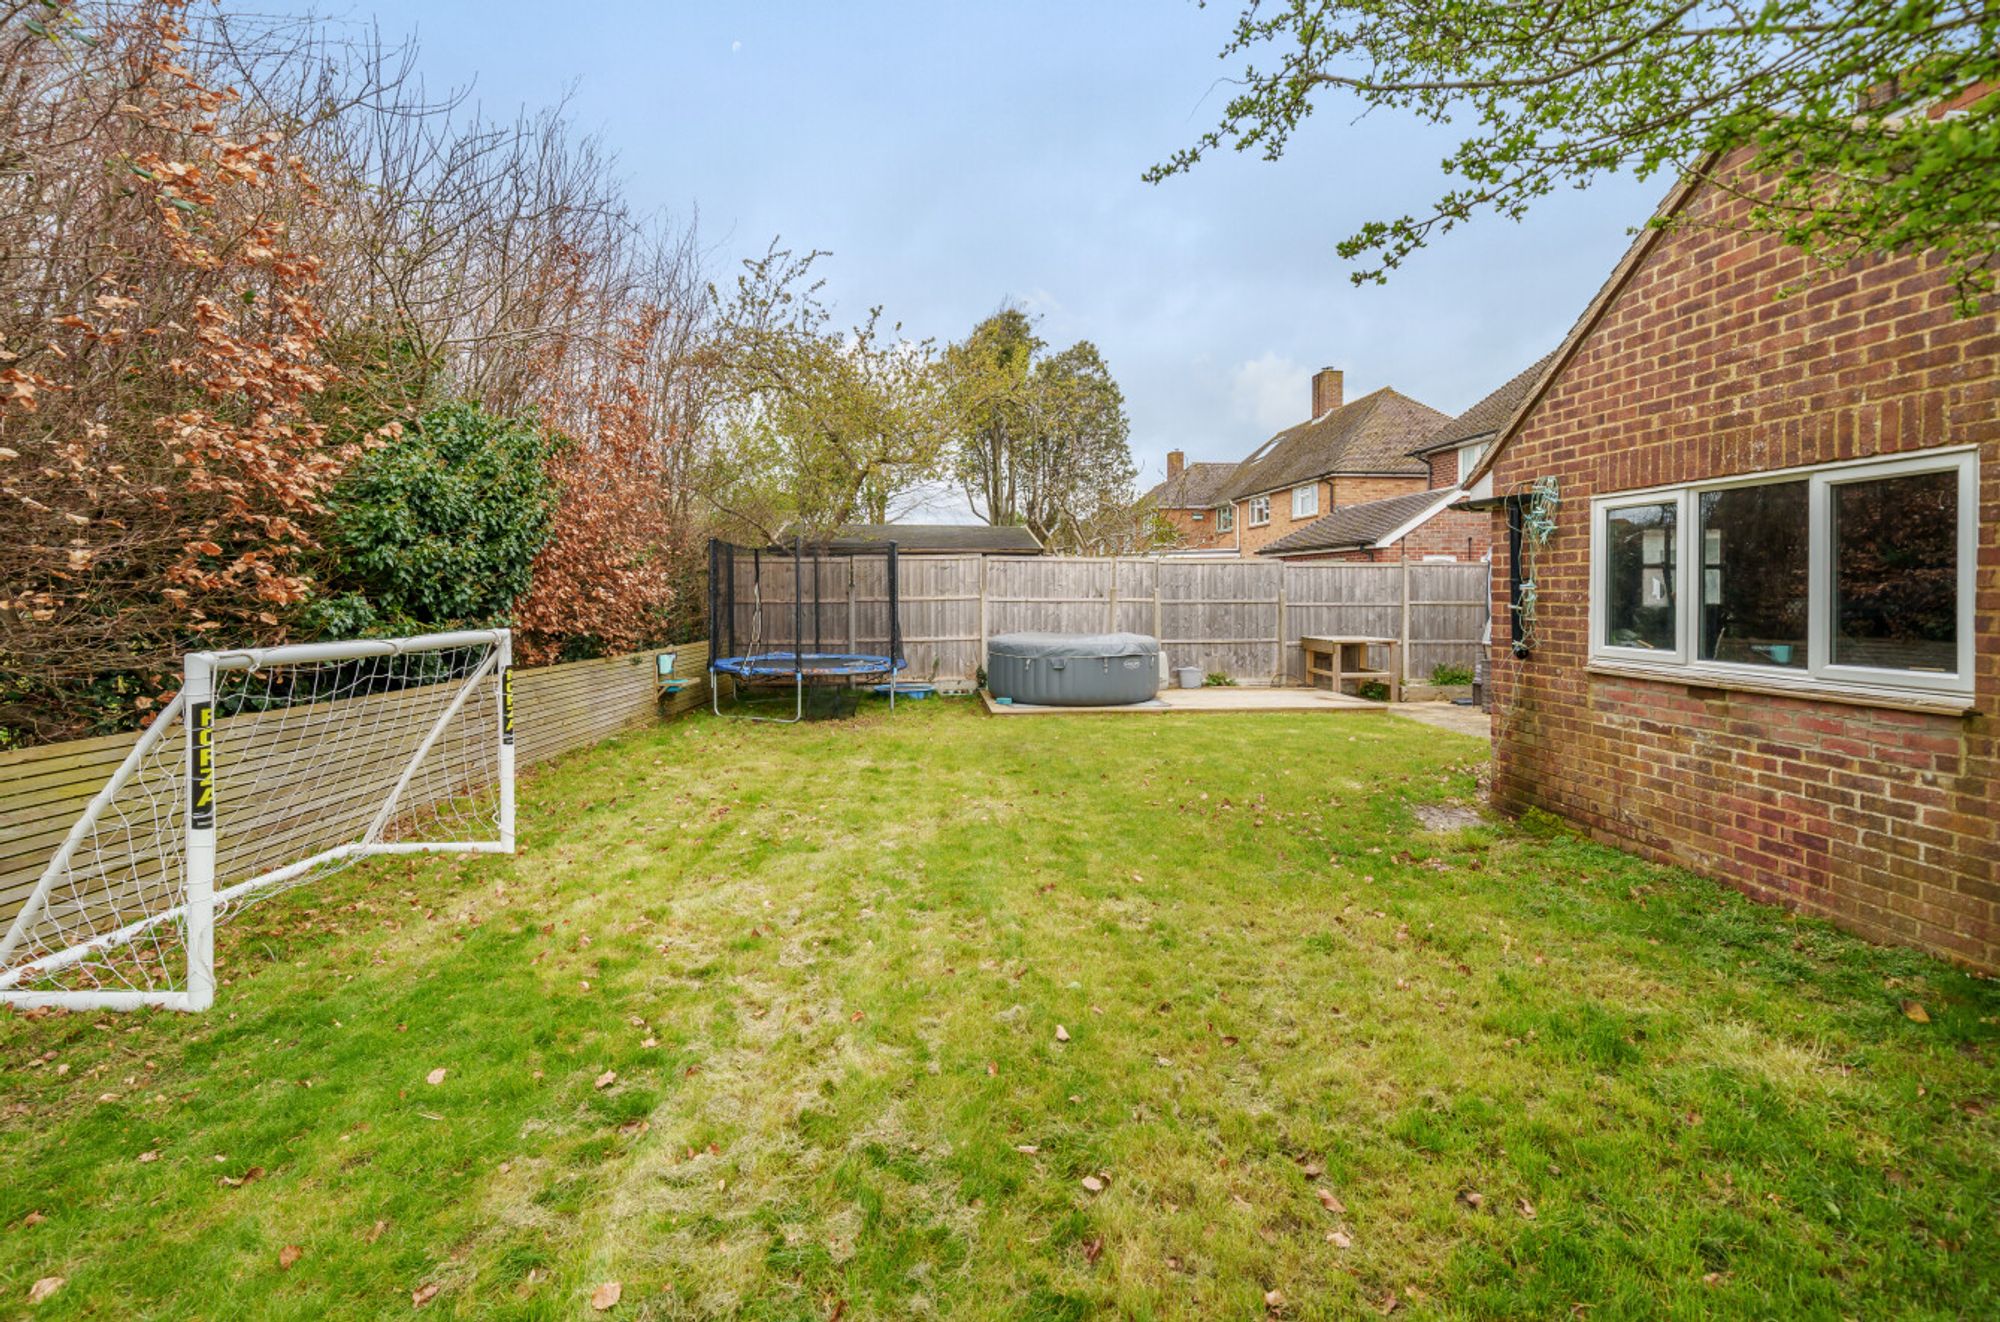 Selsey Road, Chichester, PO19